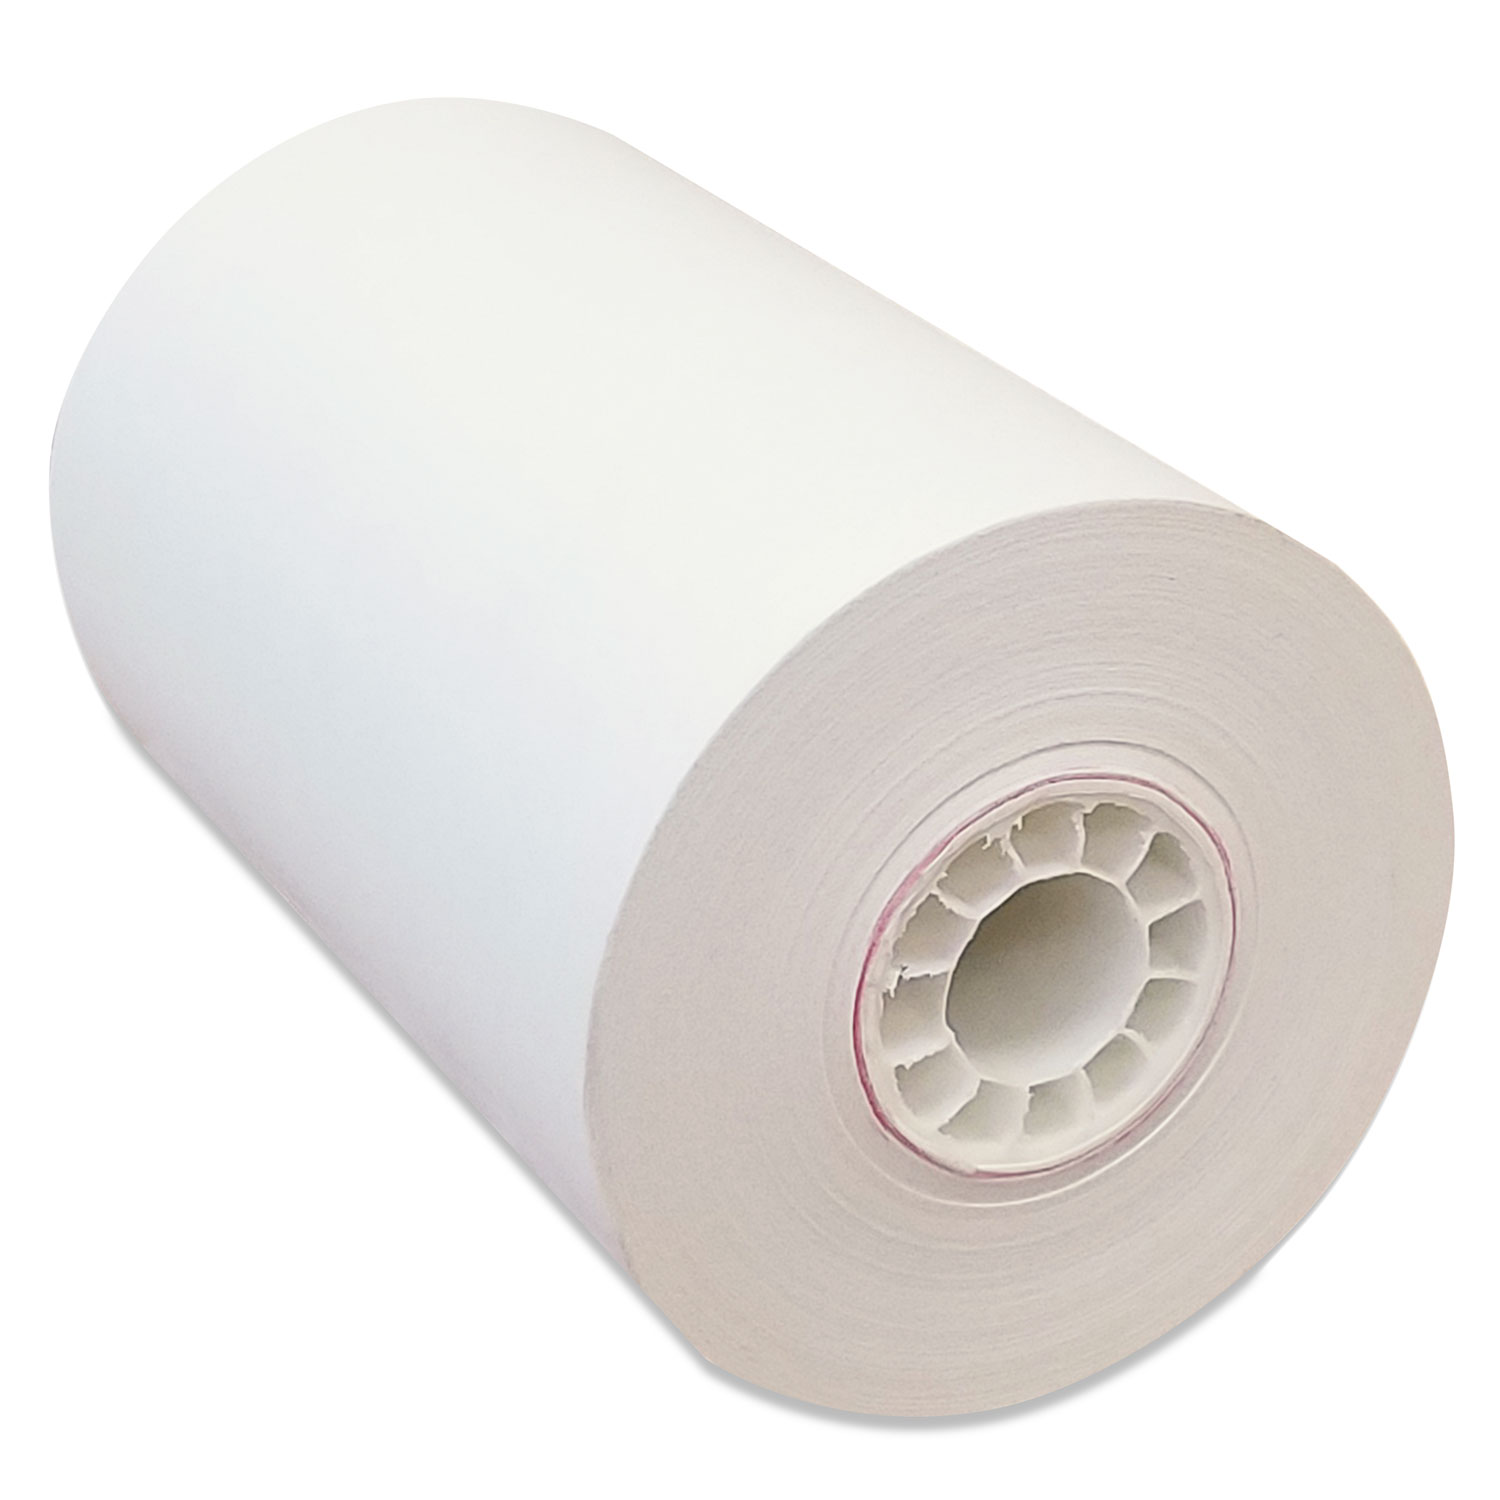 Pm Company® Direct Thermal Printing Thermal Paper Rolls 3 14 X 125 Ft White 50carton 3835